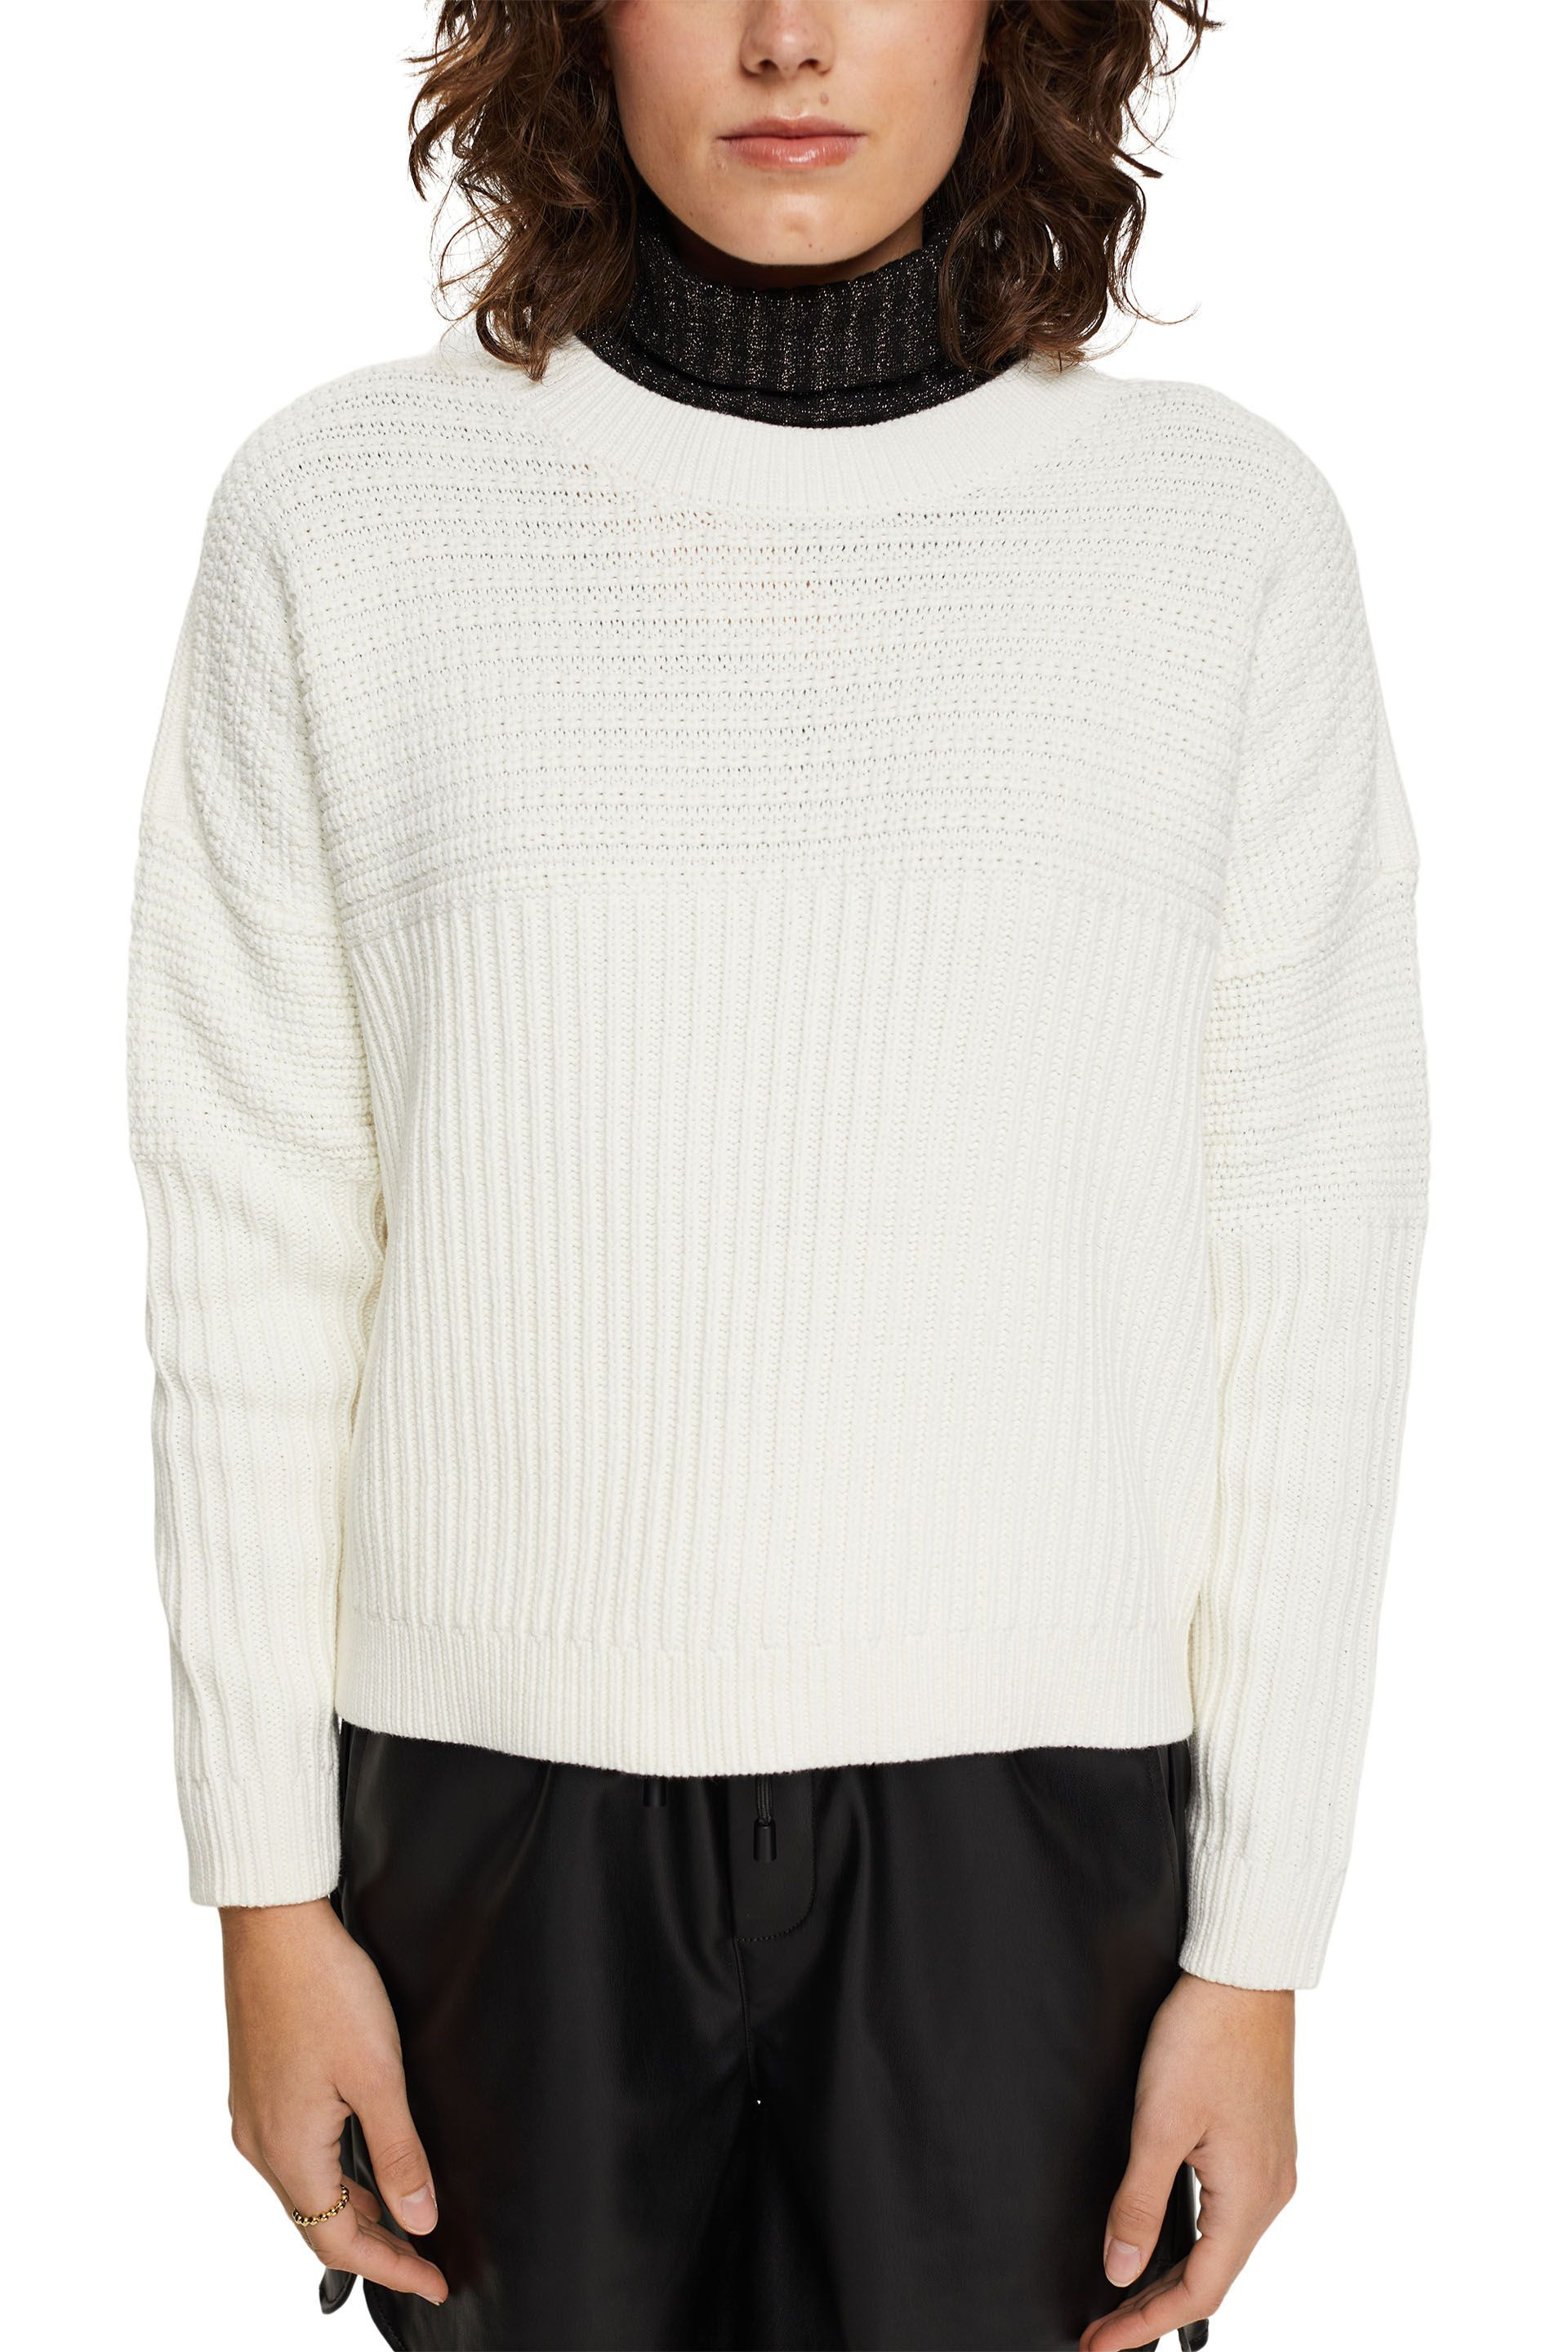 Esprit - Chunky knit pullover in cotton blend, White, large image number 1